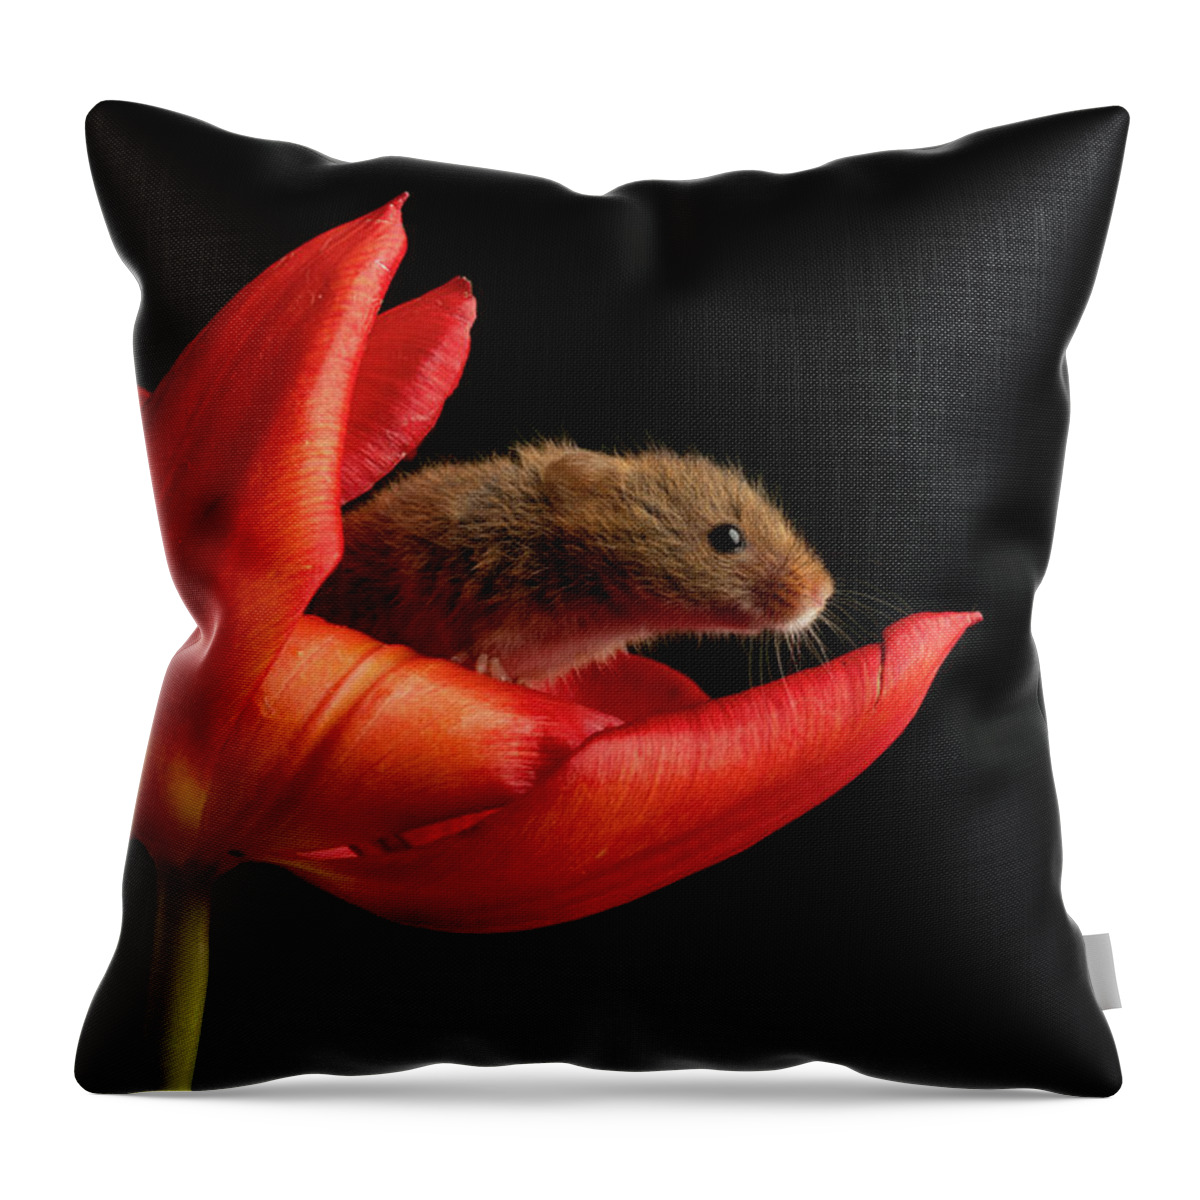 Harvest Throw Pillow featuring the photograph Hm-5236 by Miles Herbert